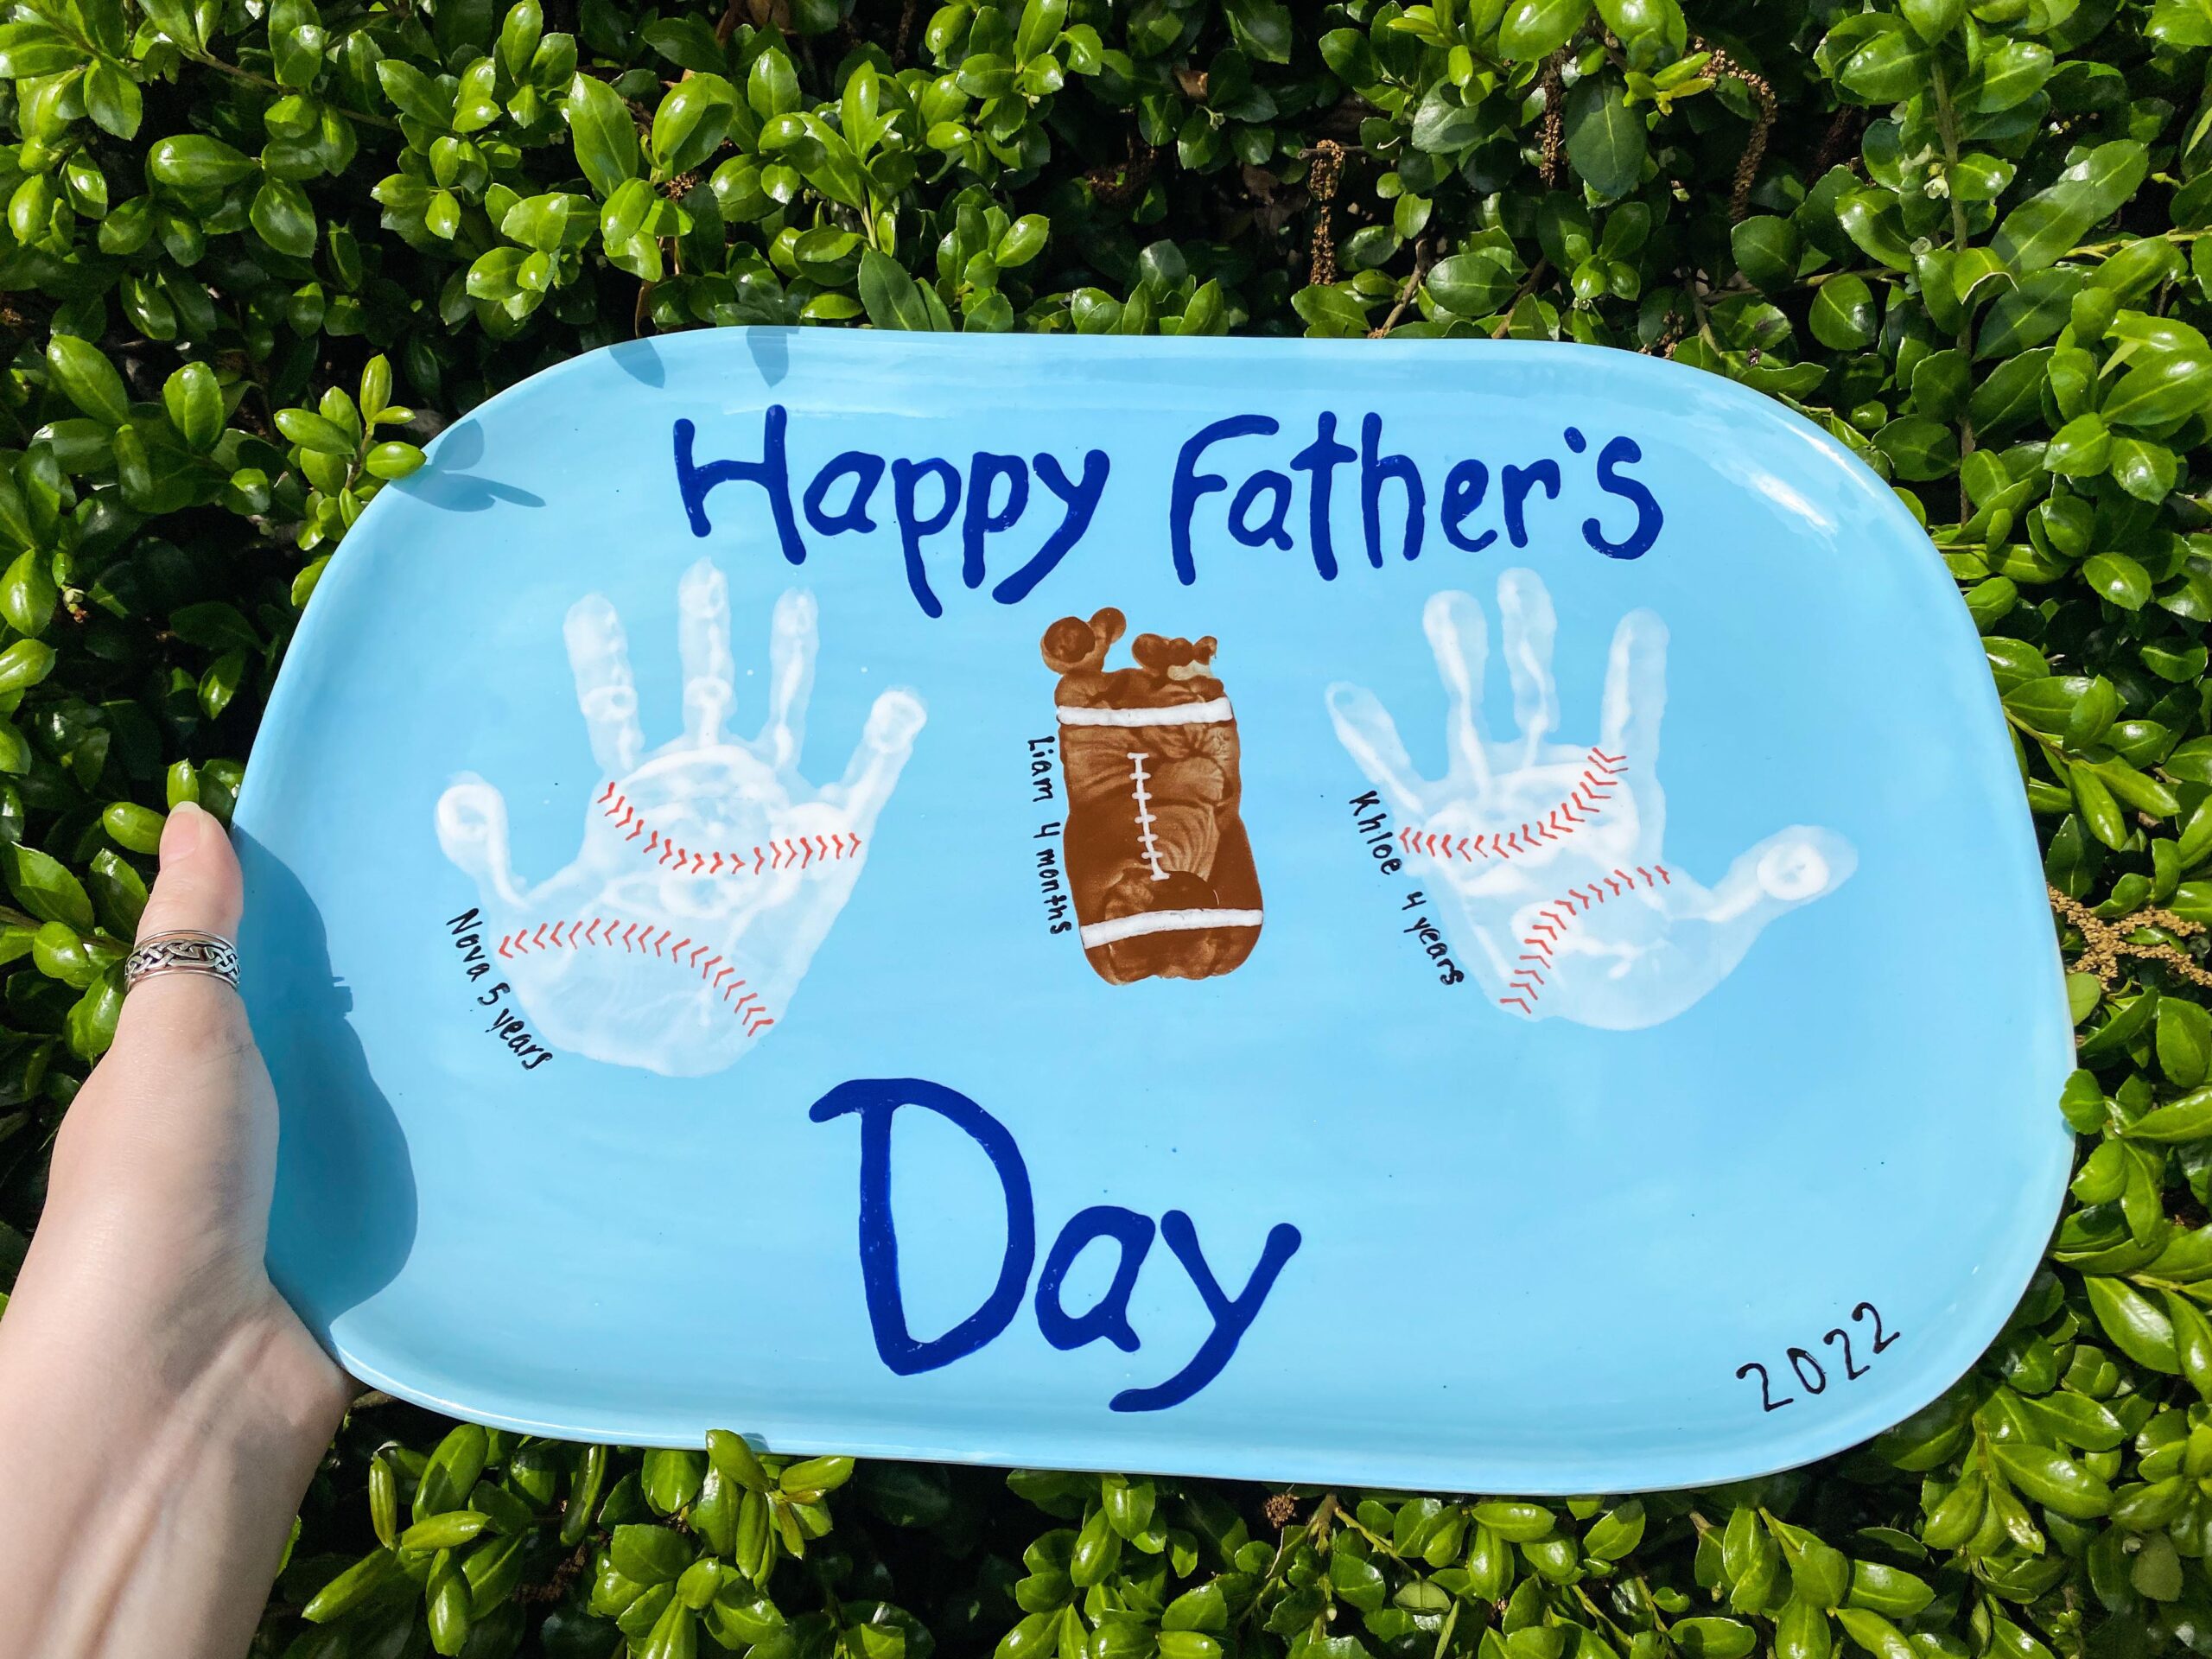 A blue tray with handprints and baseball mitt on it.